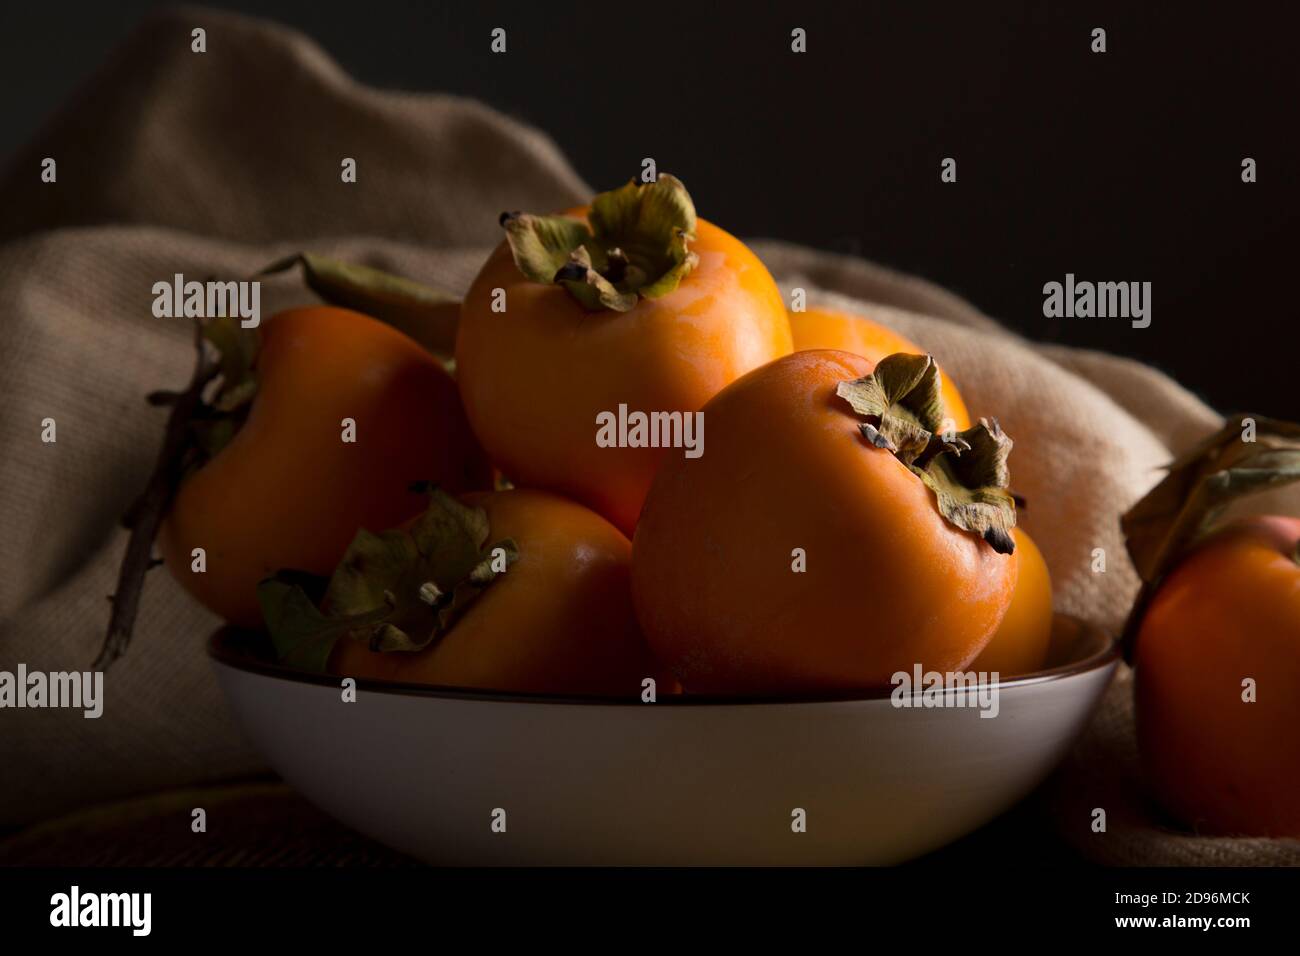 Still life with kakis and persimmon on brown wooden table in low key Stock Photo